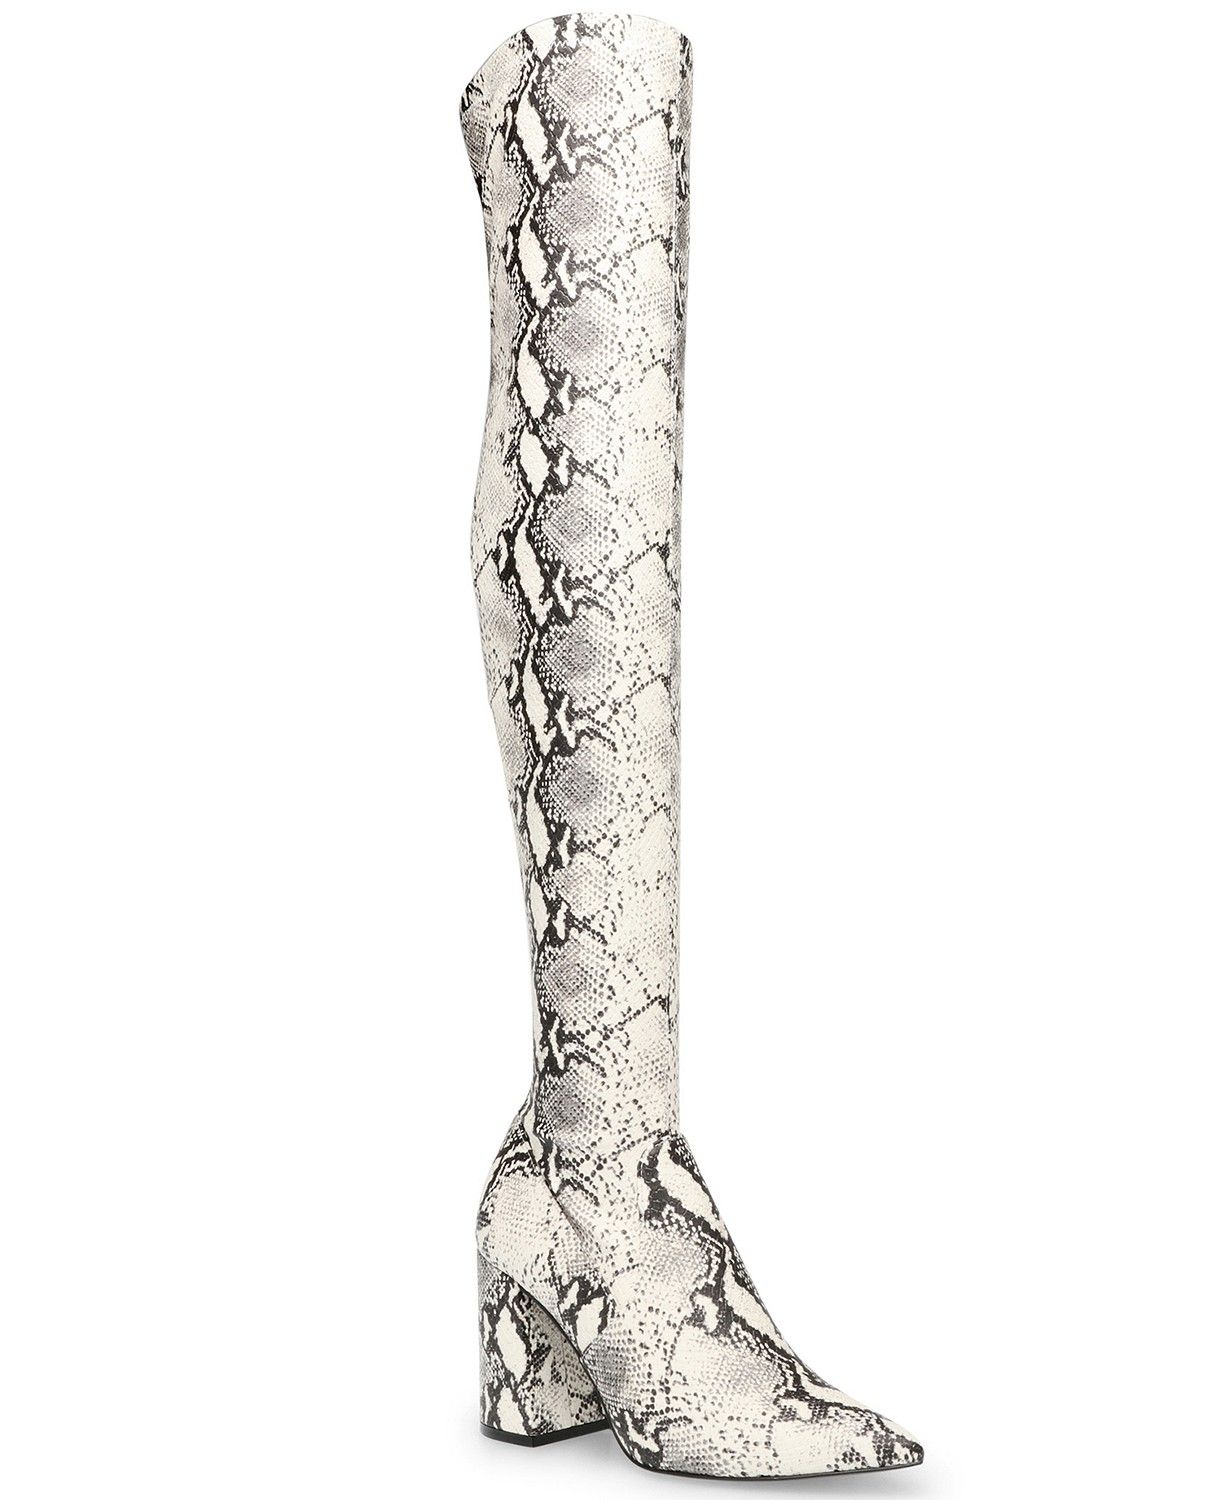 Women's Jacoby Thigh-High Over-The-Knee Boots | Macys (US)